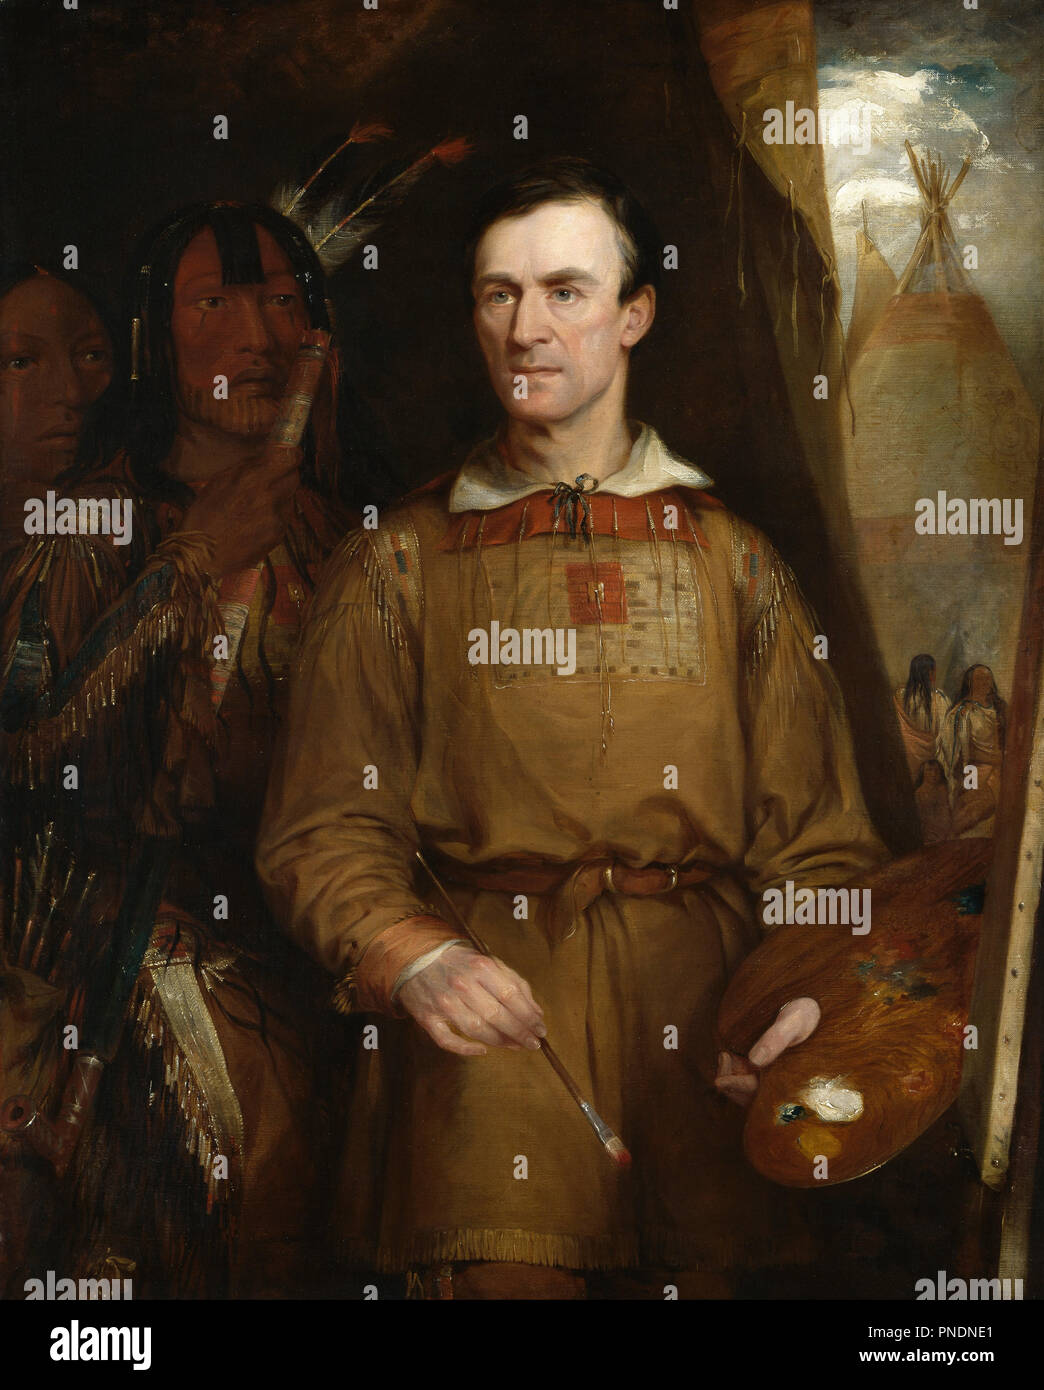 George Catlin. Date/Period: 1849. Painting. Oil on canvas. Height: 1,588 mm (62.51 in); Width: 1,334 mm (52.51 in). Author: William Fisk. Stock Photo